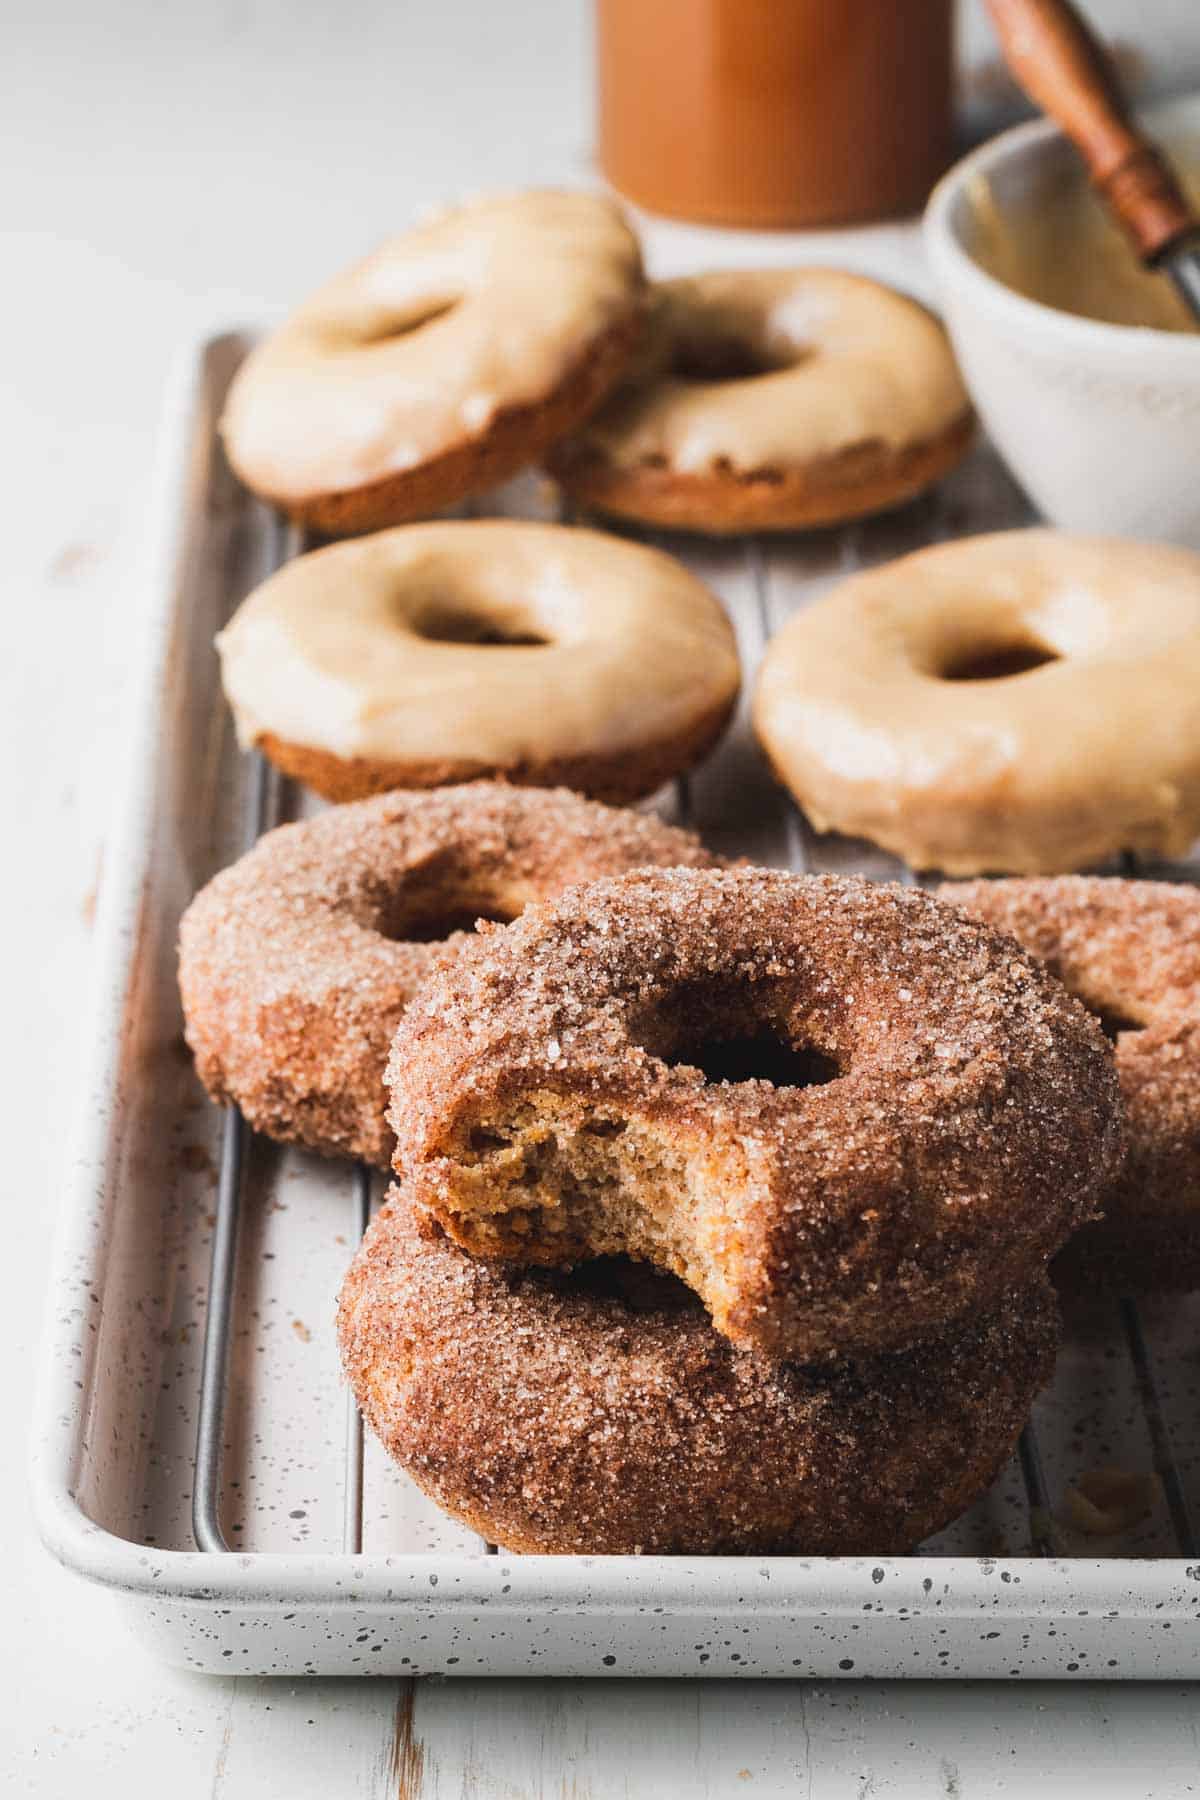 Apple cider donuts on a baking sheet already coated in cinnamon sugar and maple glaze.